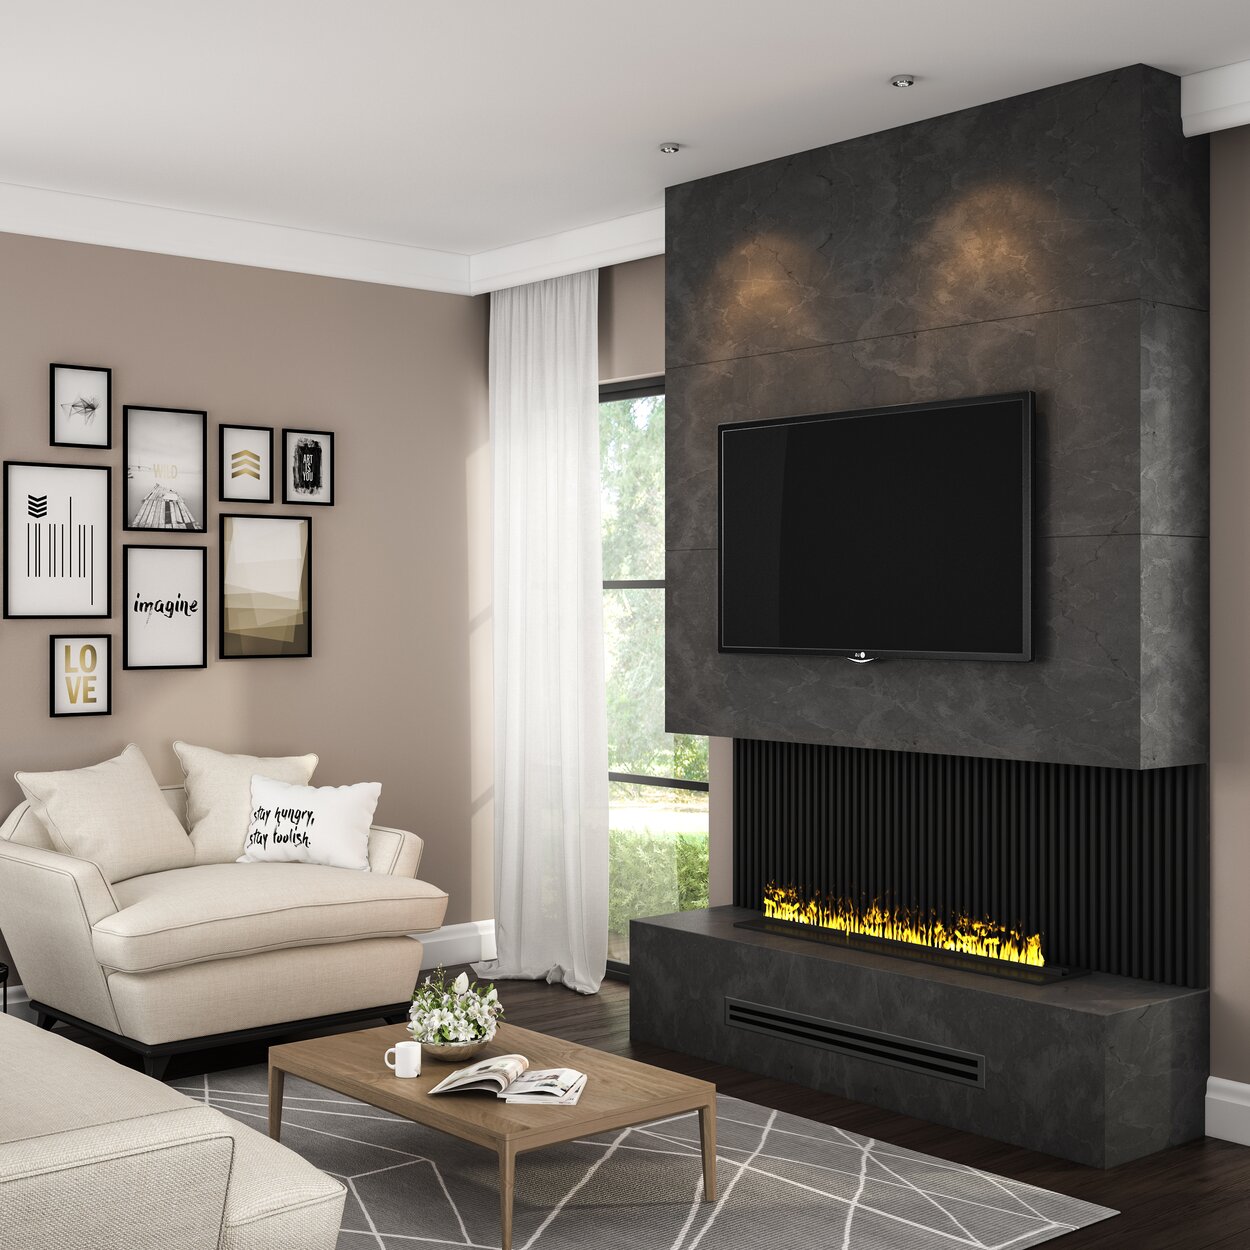 Electric fire Cassette 1000 from Dimplex in a cosy living room built into a black wall